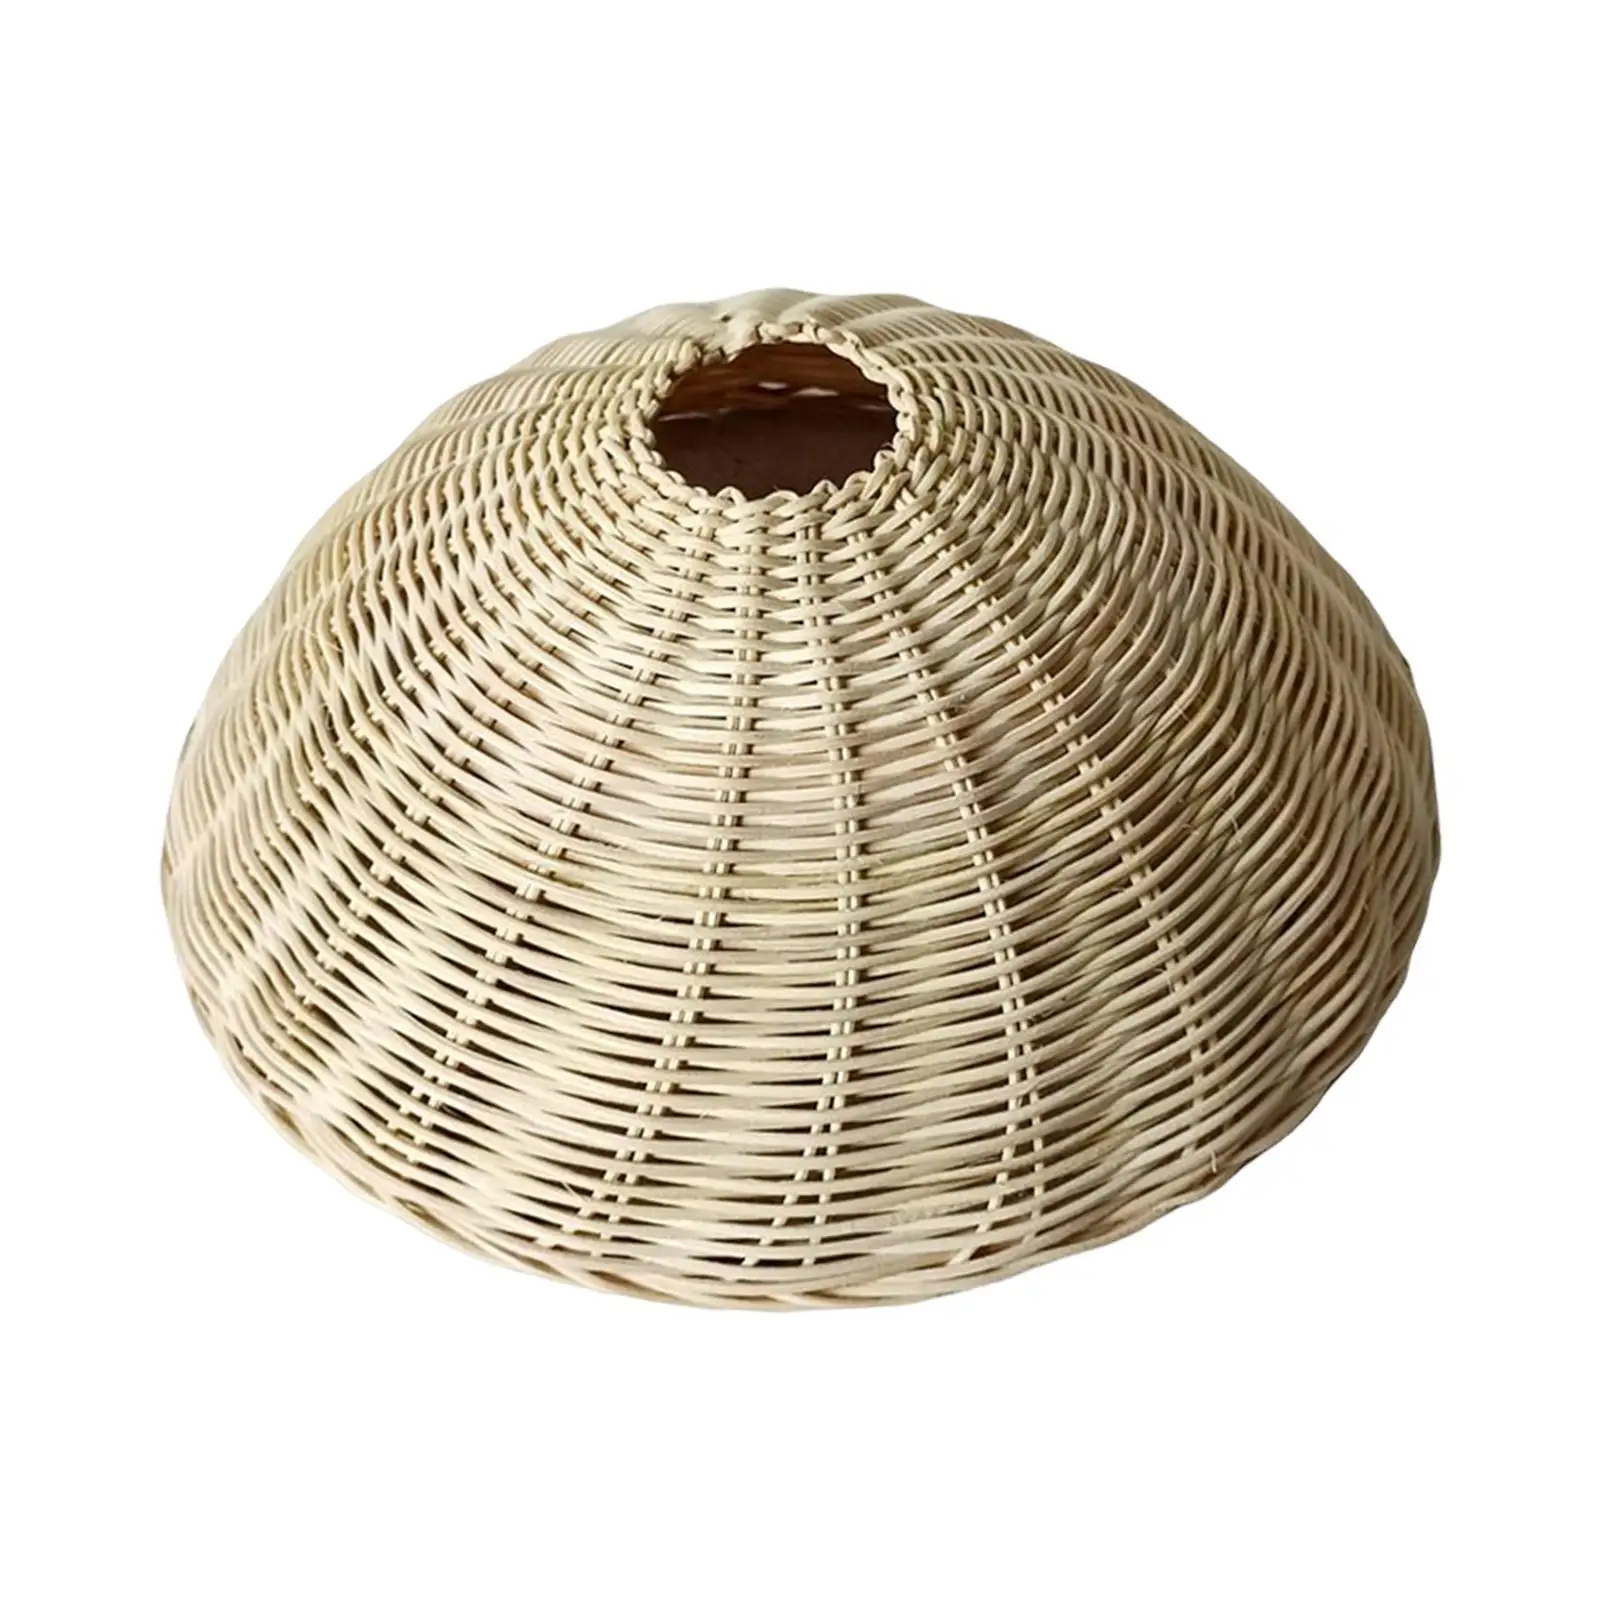 Bamboo Lamp Shade Ceiling Light Bamboo Dome Shade for Teahouse Dining Room Restaurant